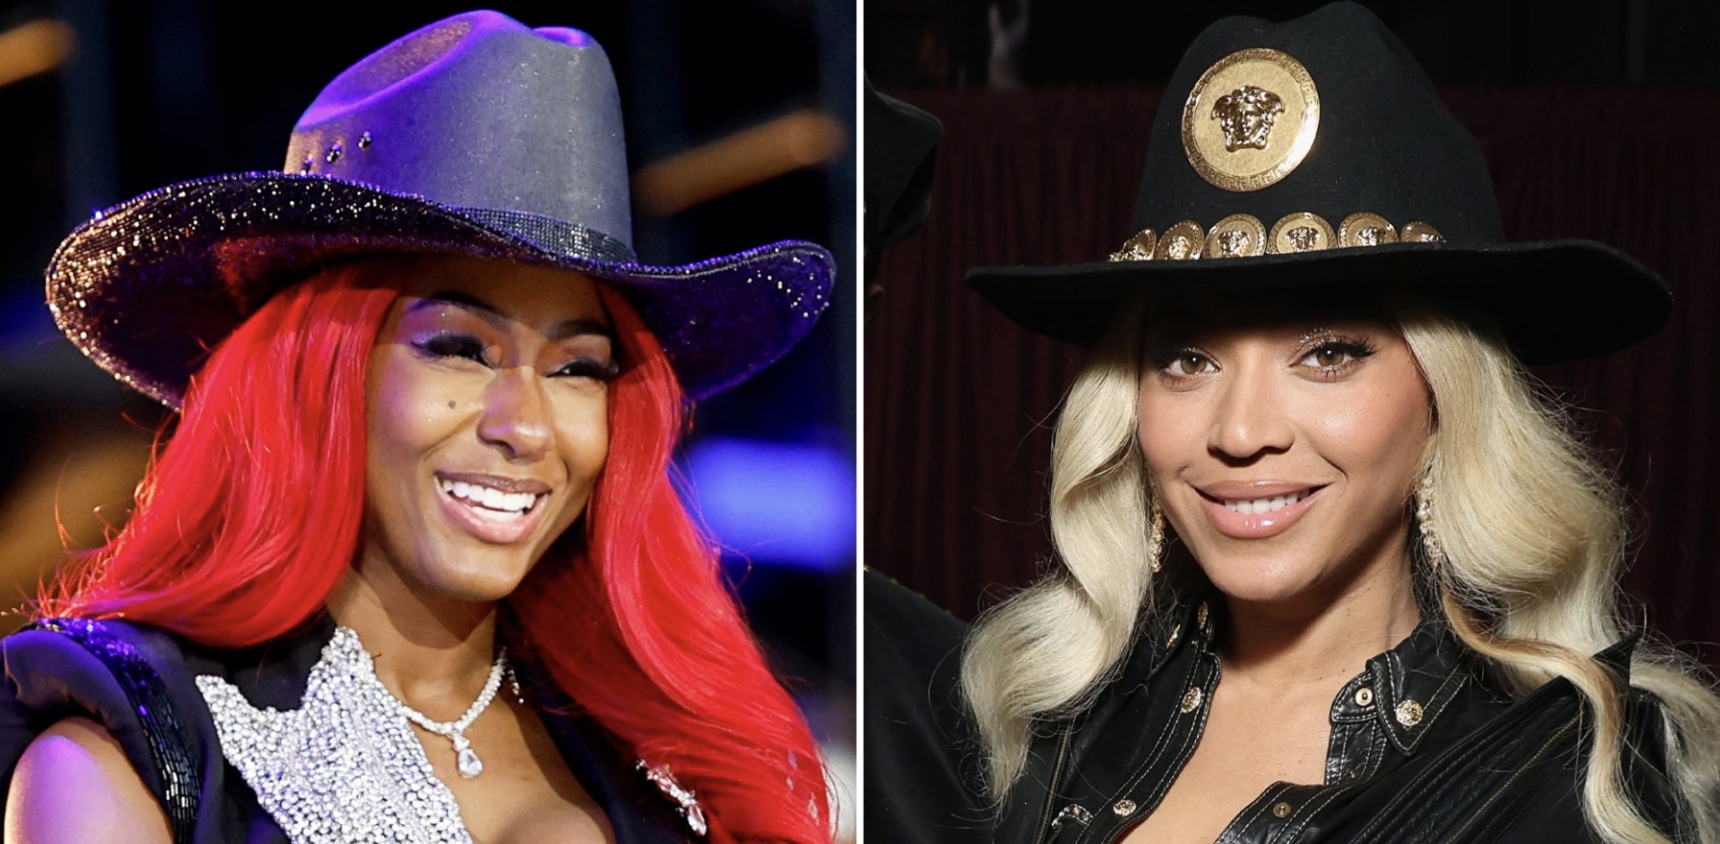 Reyna Roberts Teams Up with Beyoncé, Promises Dazzling Diversification in Entertainment!